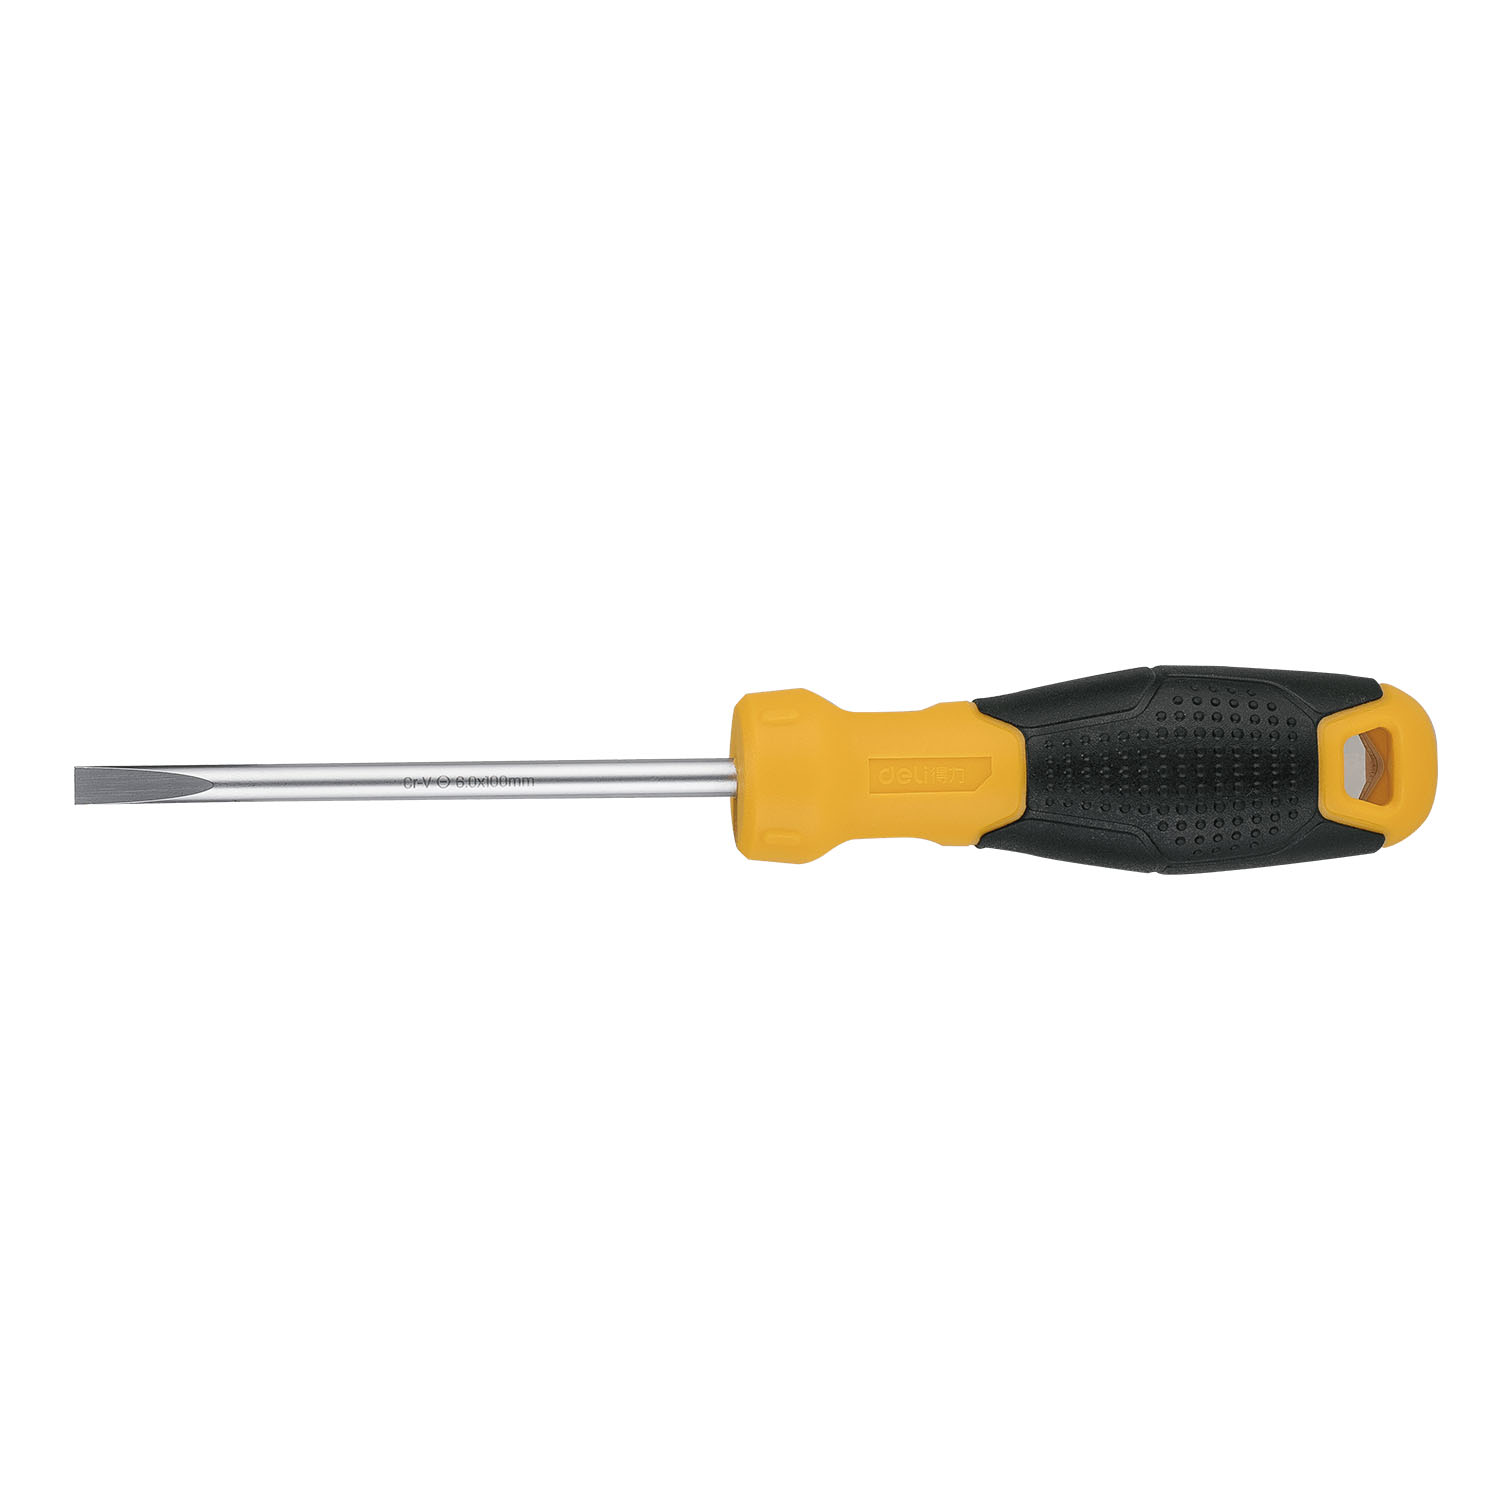 Precision slotted Screwdriver for keyboard